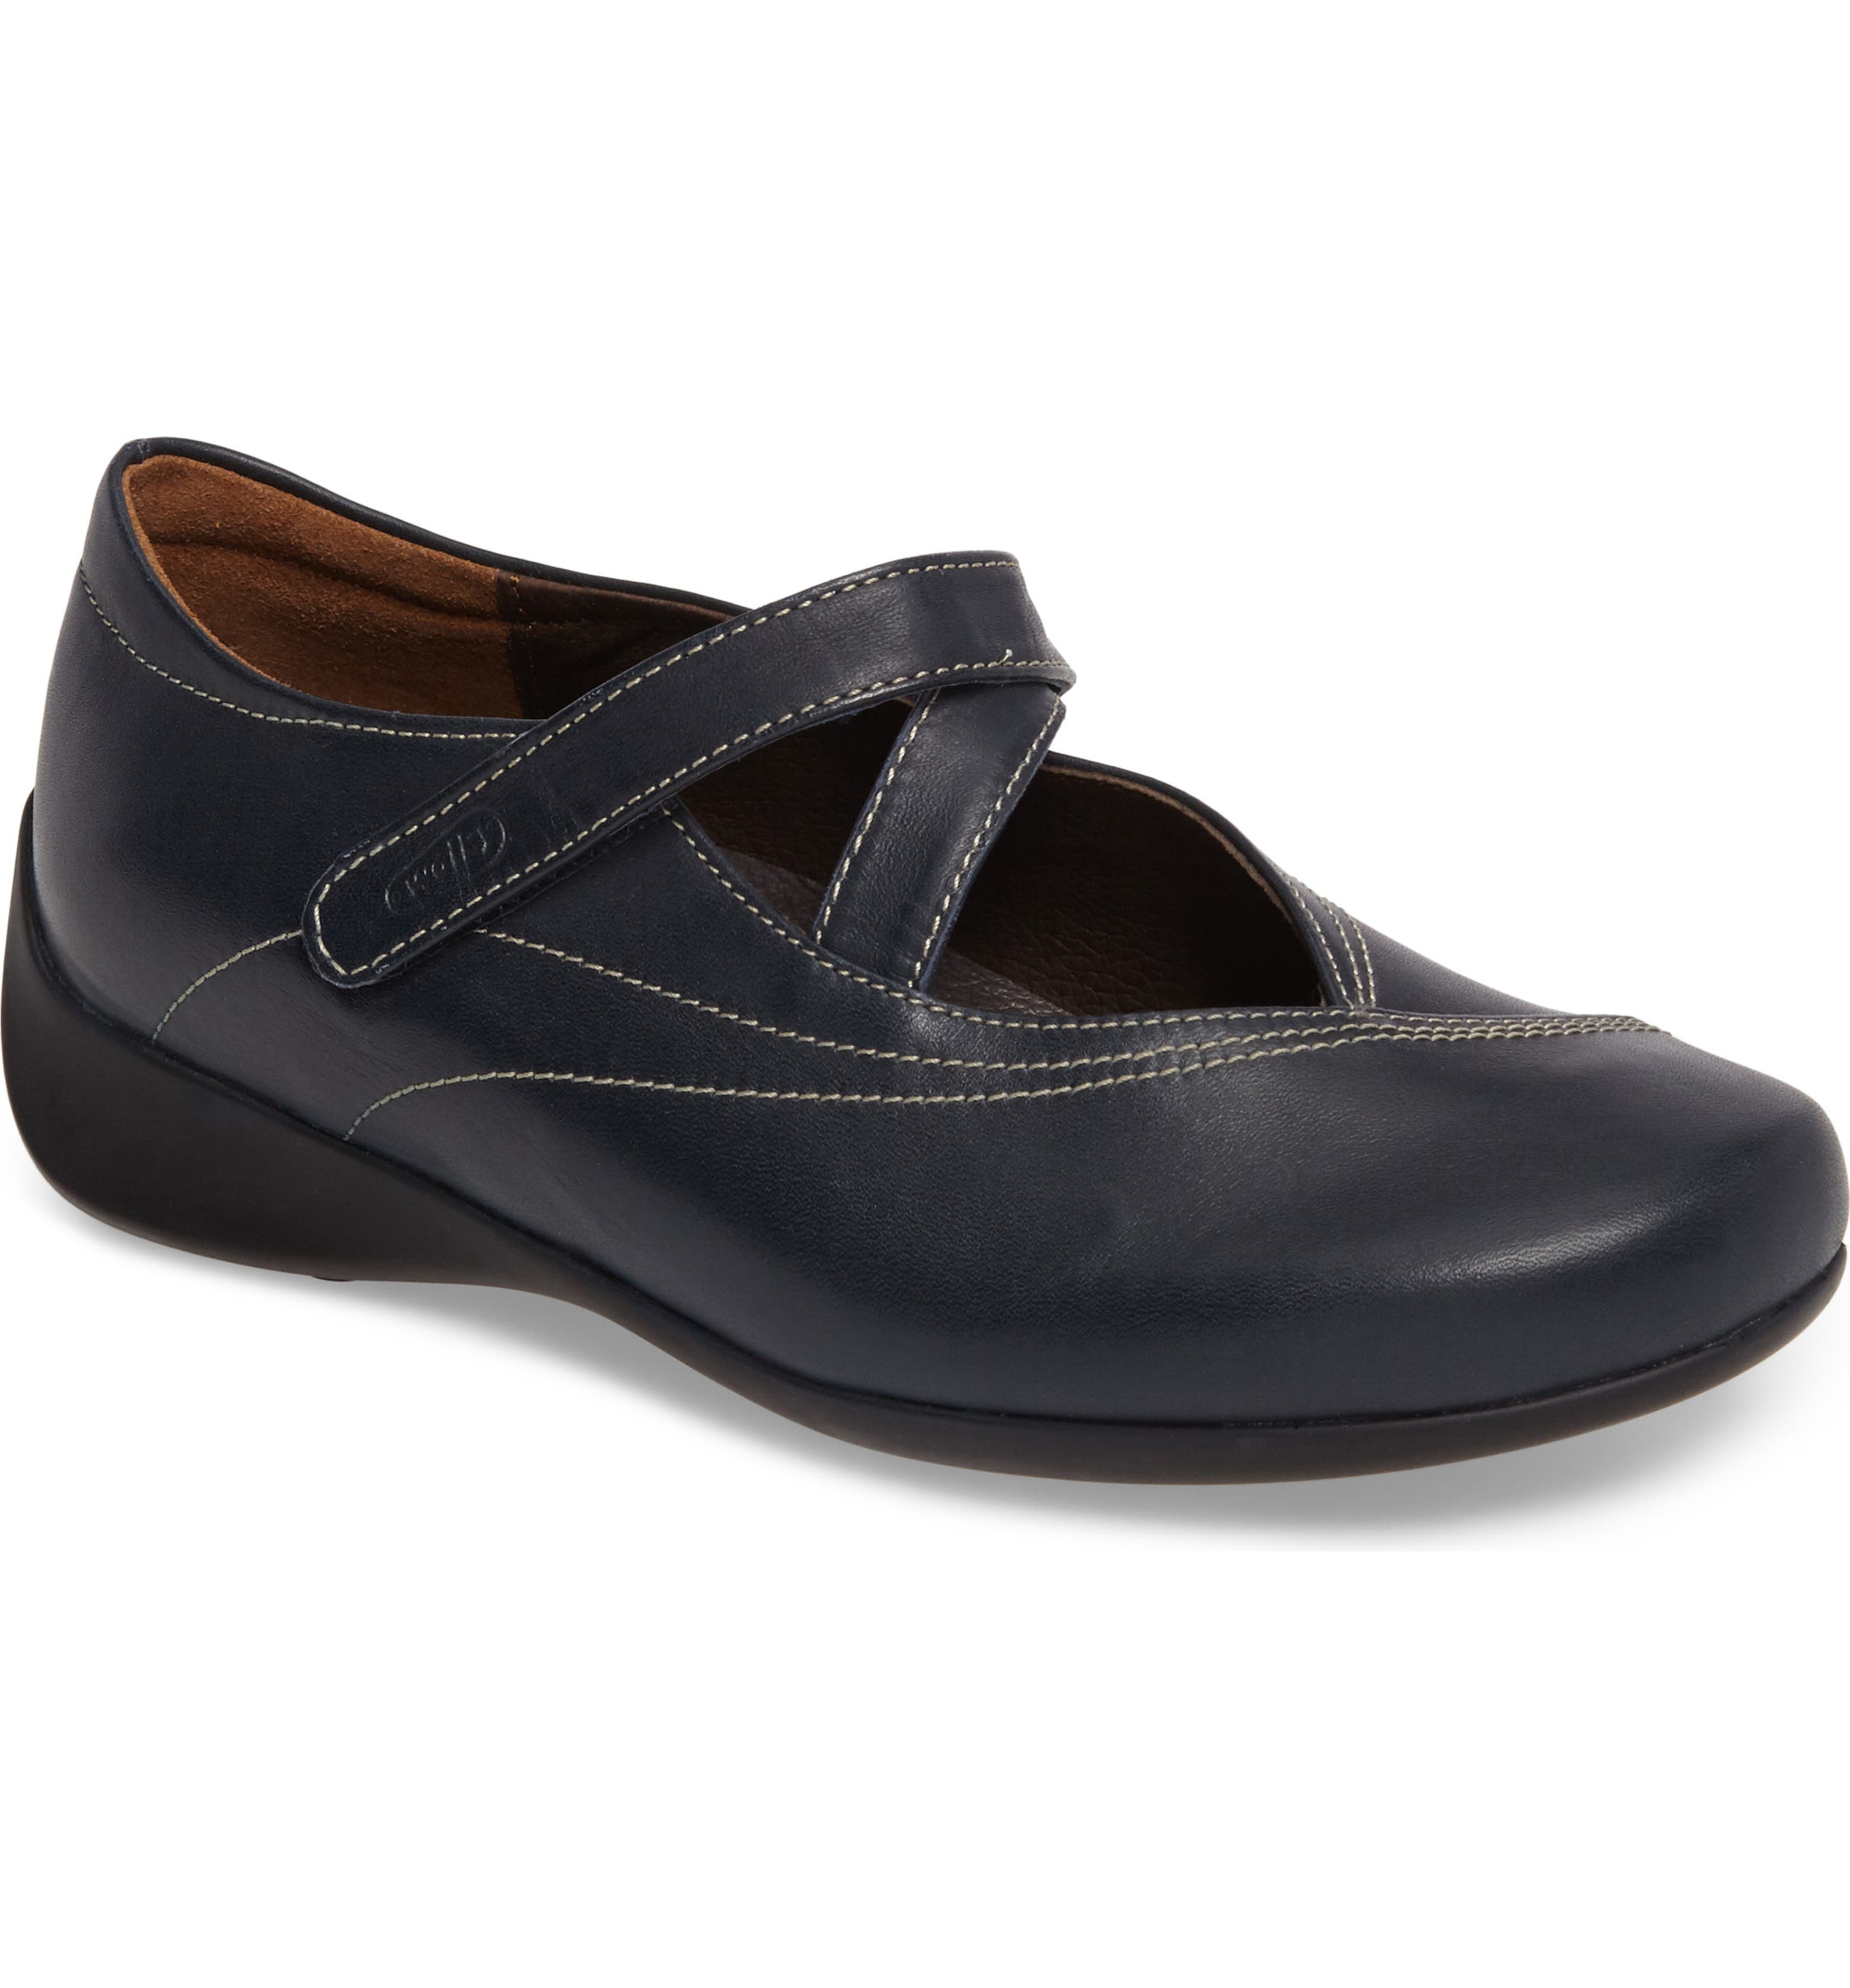 Wolky Passion Mary Jane Flat (Women) Nordstrom